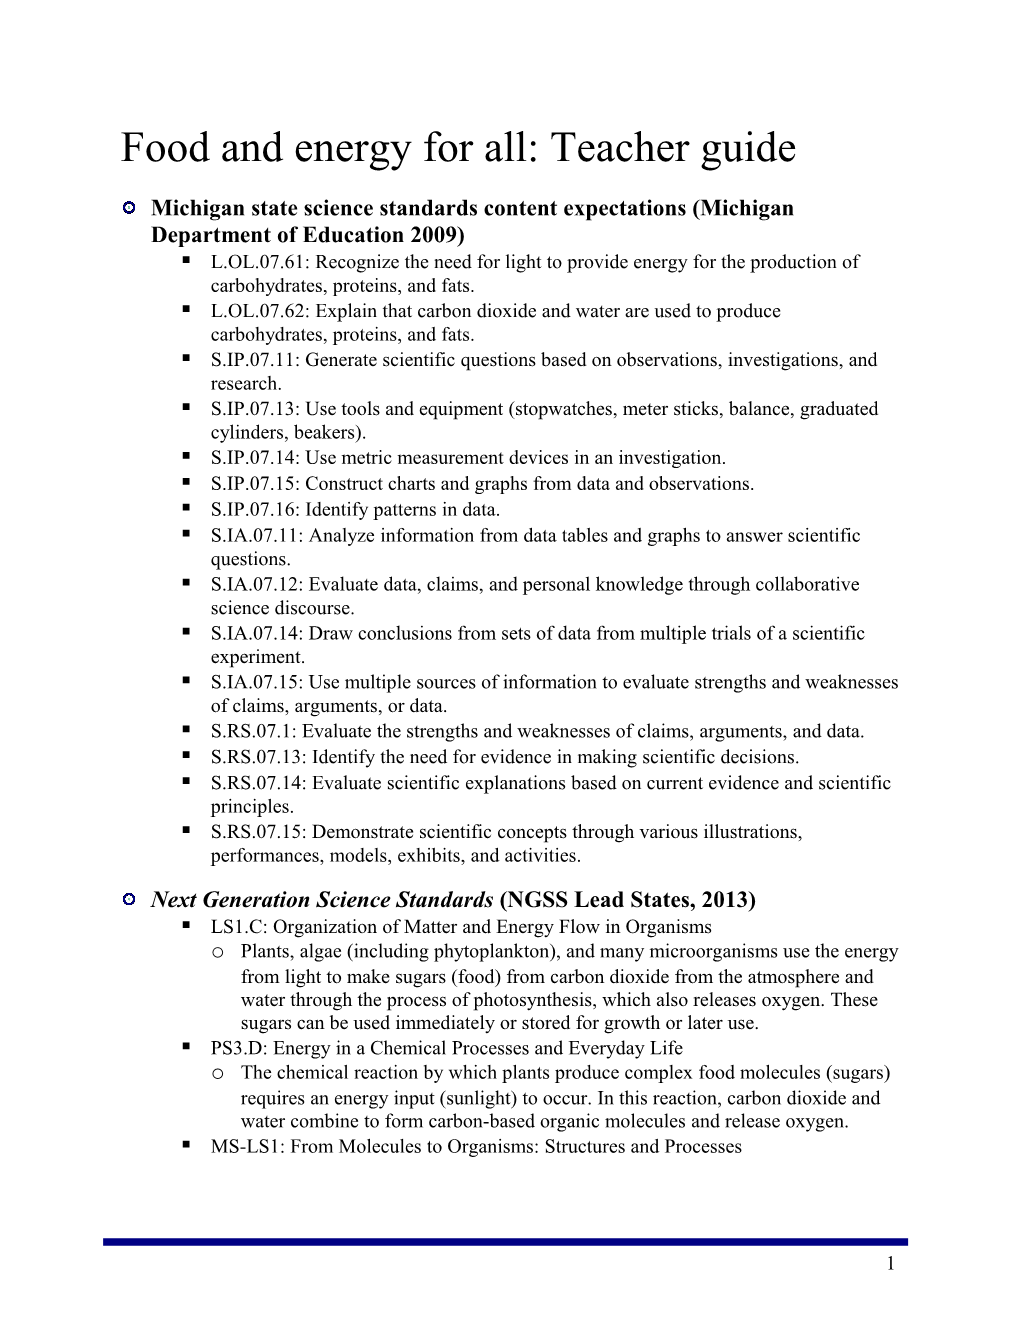 Food and Energy for All: Teacher Guide